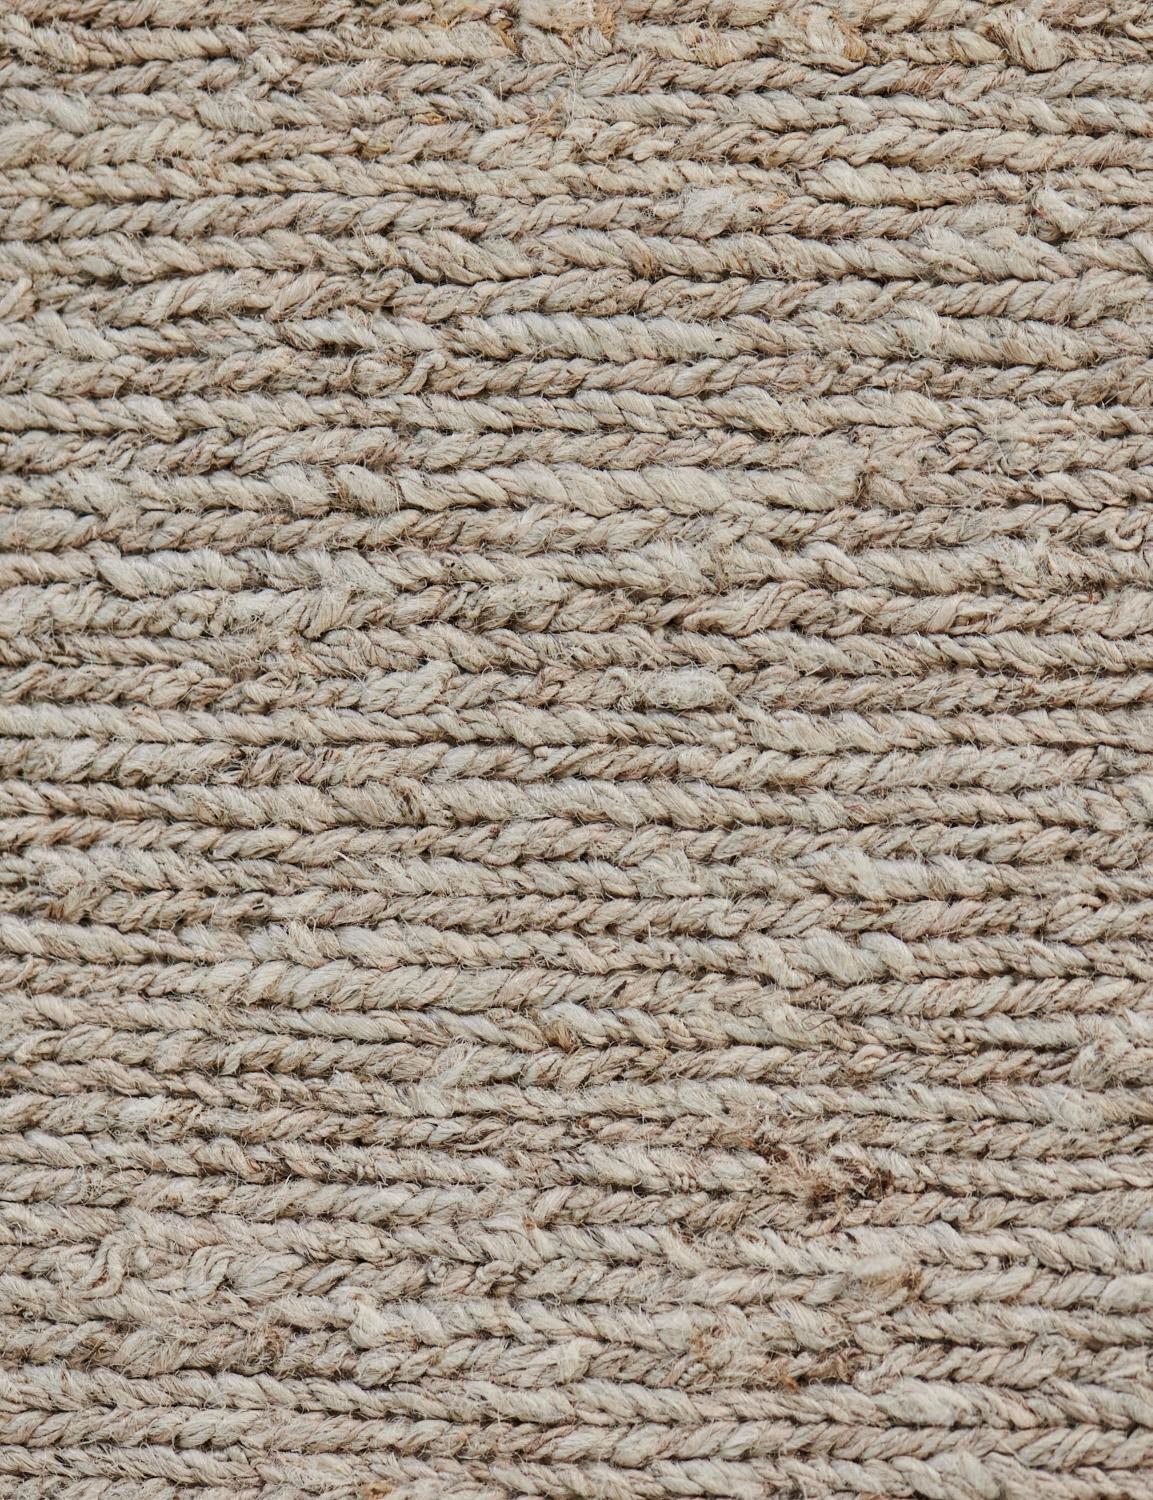 This handwoven textured rug is part of the Mansour Modern collection which is primarily inspired by vintage rugs whose textures and designs are relevant as ever in the 21st century.